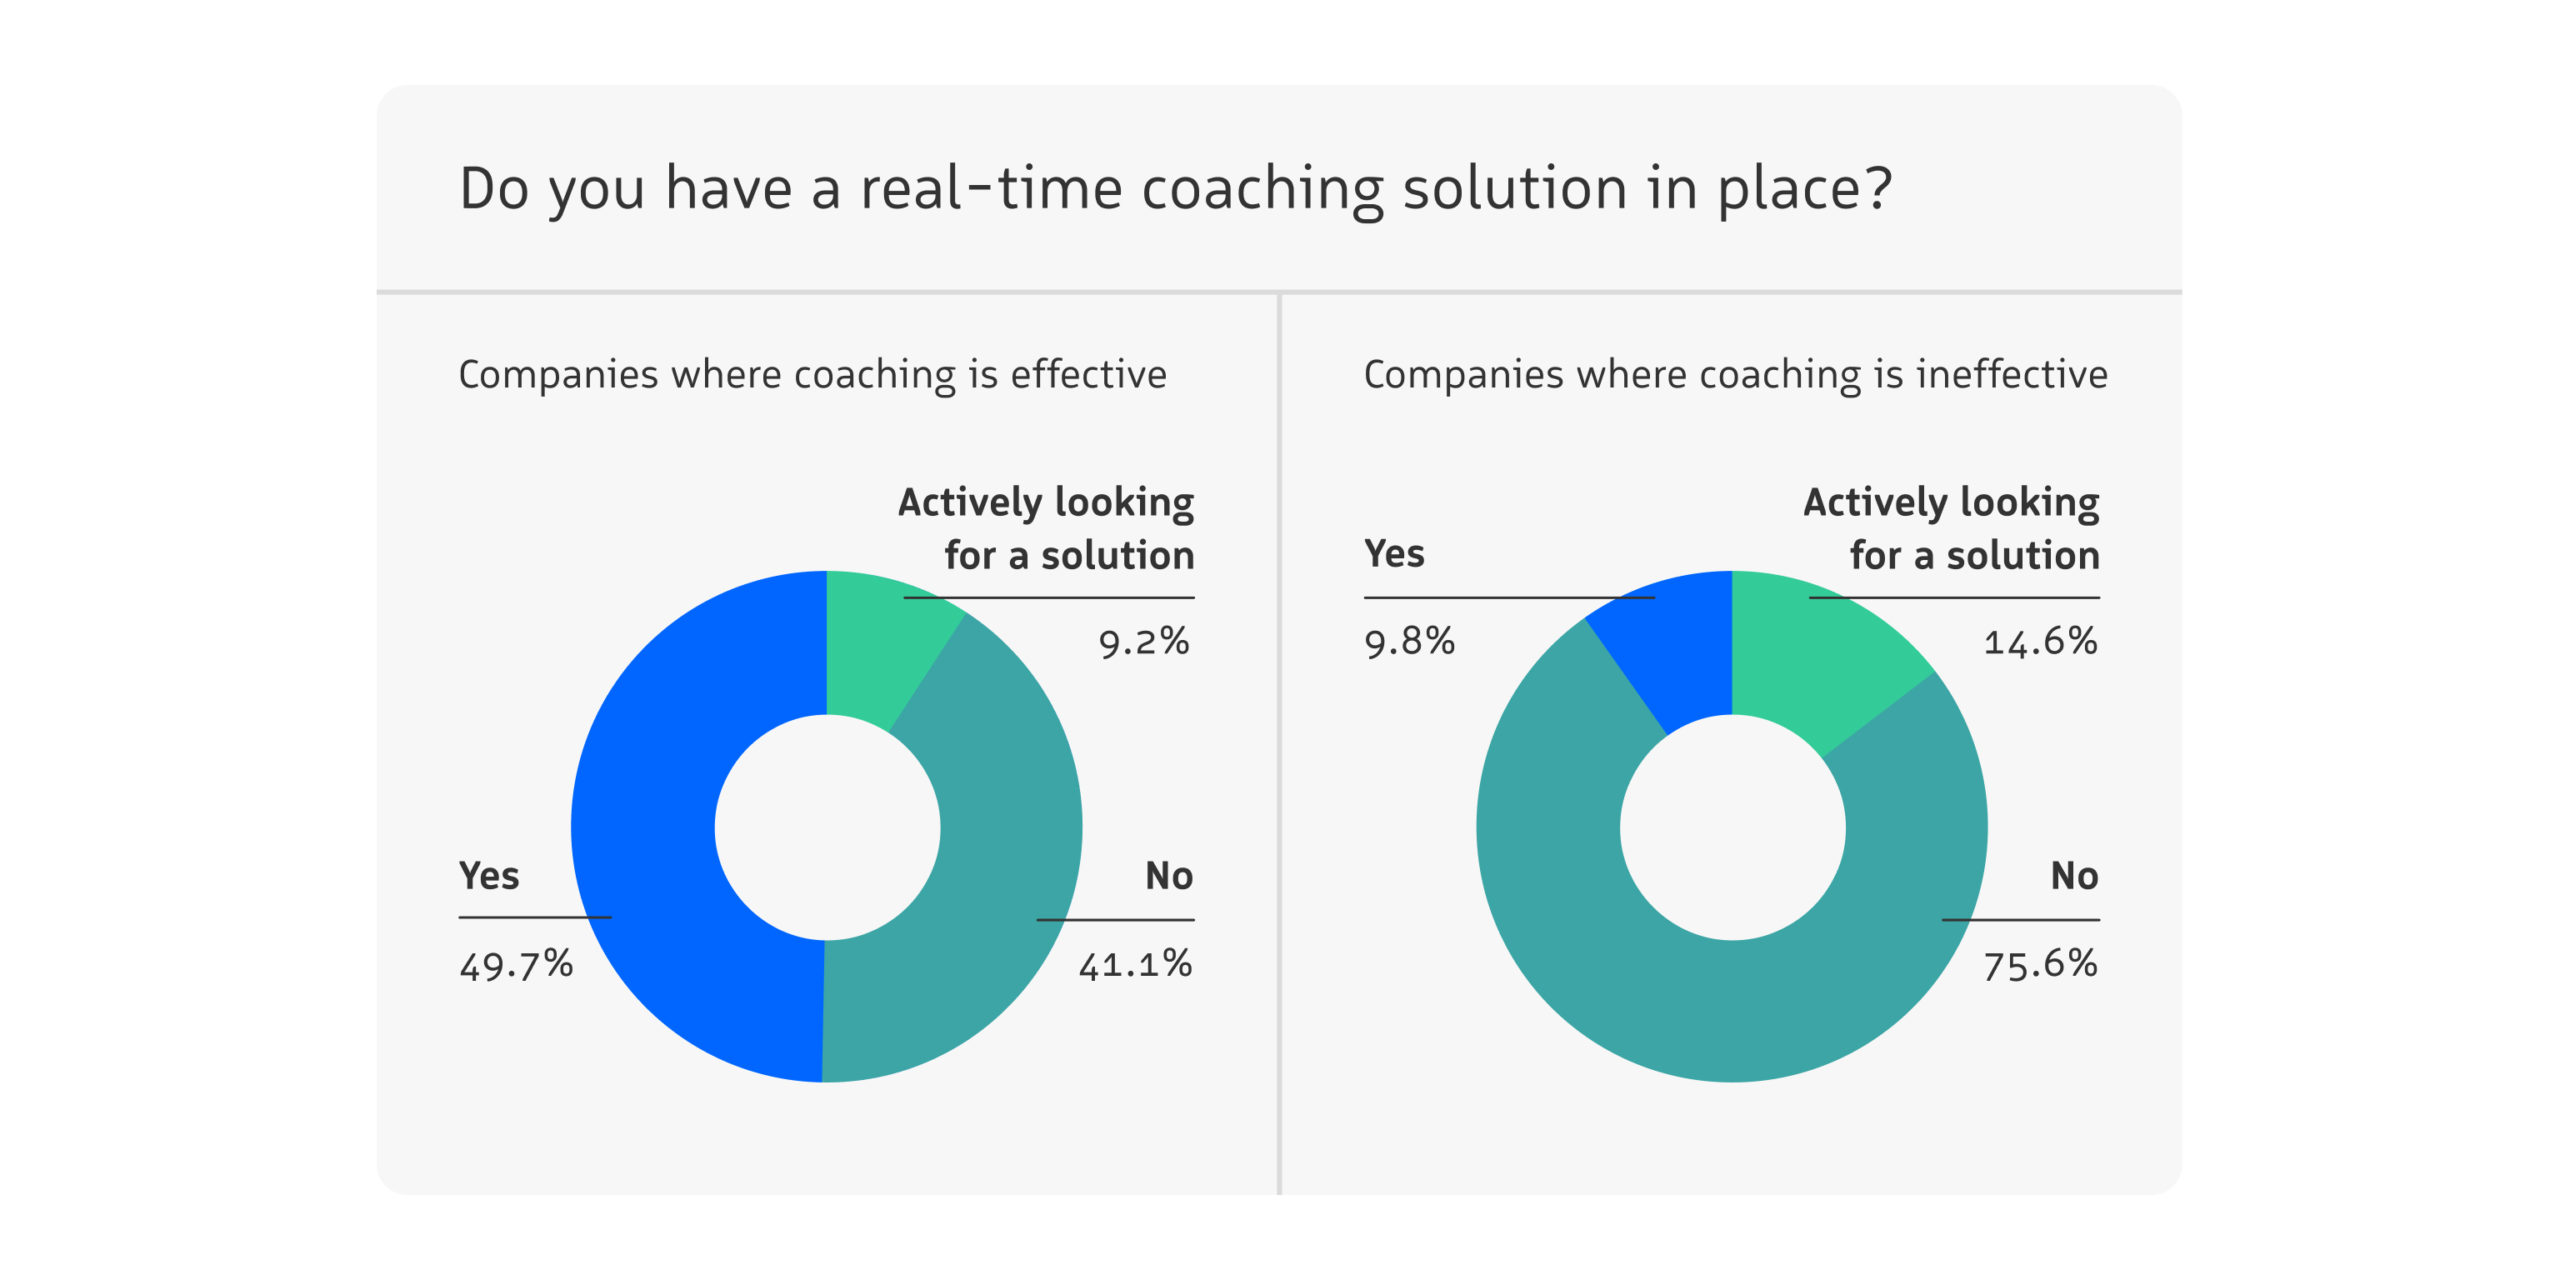 Companies with effective coaching have a conversation intelligence platform.